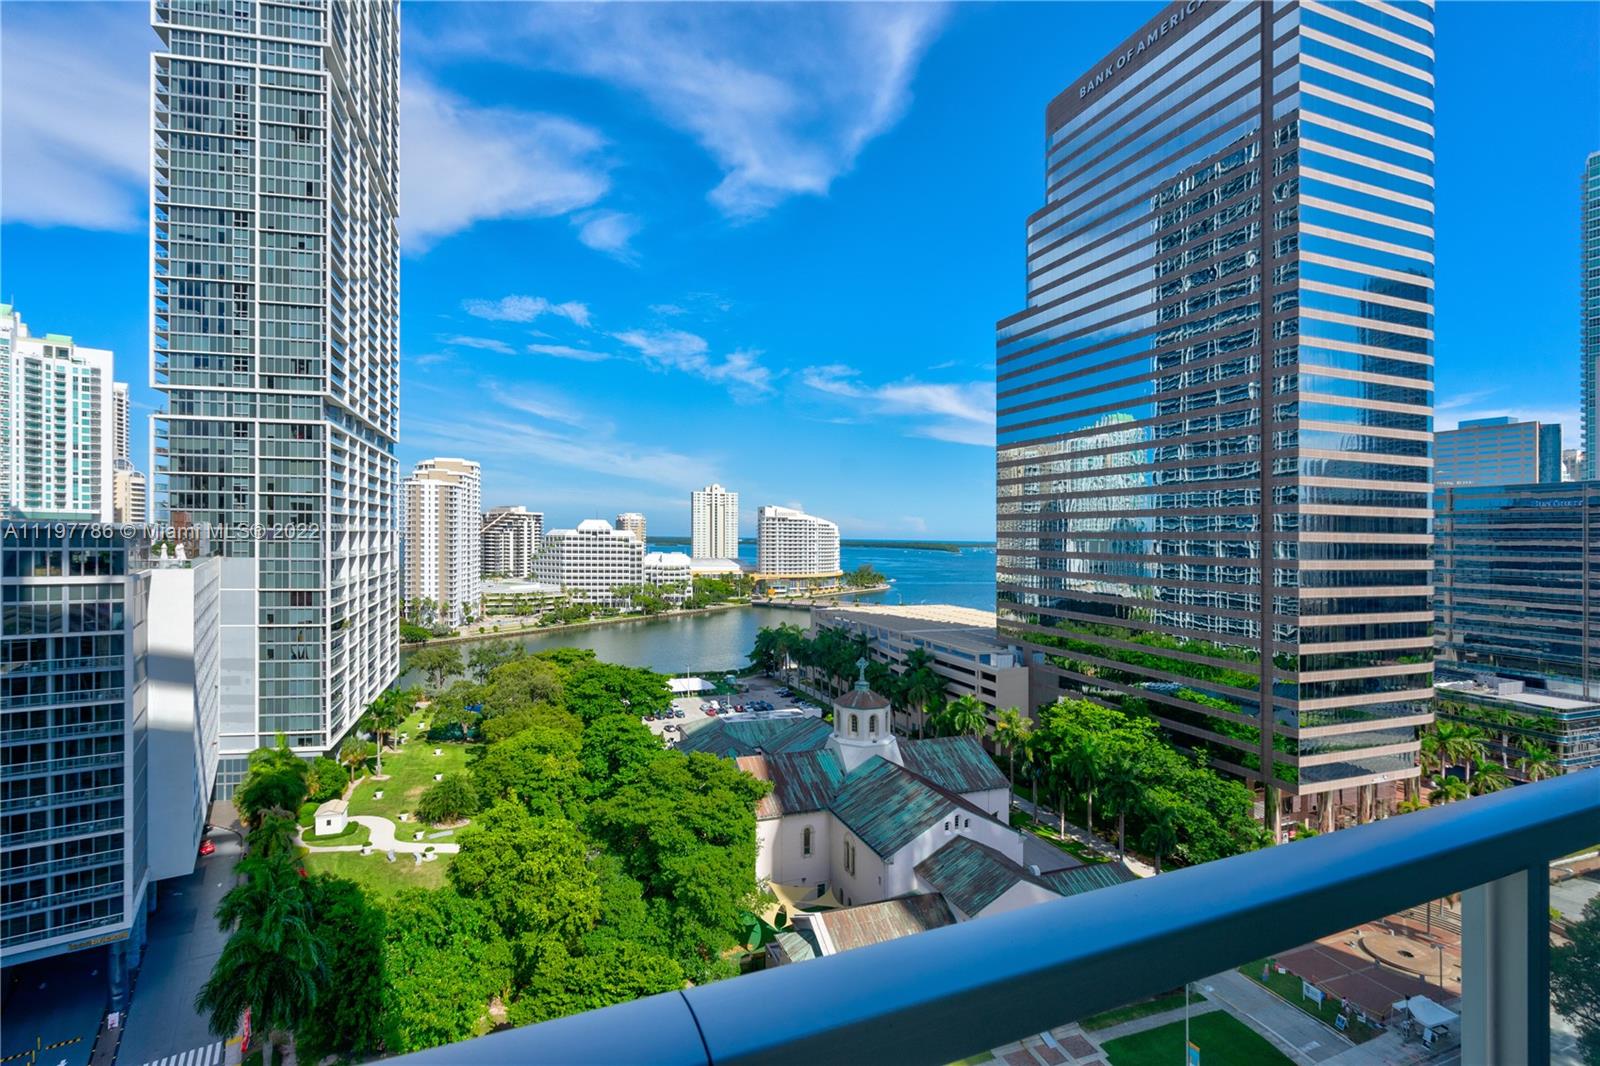 Amazing Turn Key 1 bedroom + Den with 1 Bathroom with incredible views from the Bay and City. European Style Kitchen with top of line appliances. Master Suite with great view, electric shade, huge bathroom with separate Tub and Glass Shower. One Assign Parking Space. Fine and great Taste in all details at this unit in the desirable 500 Brickell. Building has great amenities like 3 Pools ( one of them located at 42nd floor with panoramic view, Theater, Sports Bar Room, Spa and other features. Located at the heart of Brickell, near the great restaurants, Brickell City Centre Mall and other great things. You Must see!!